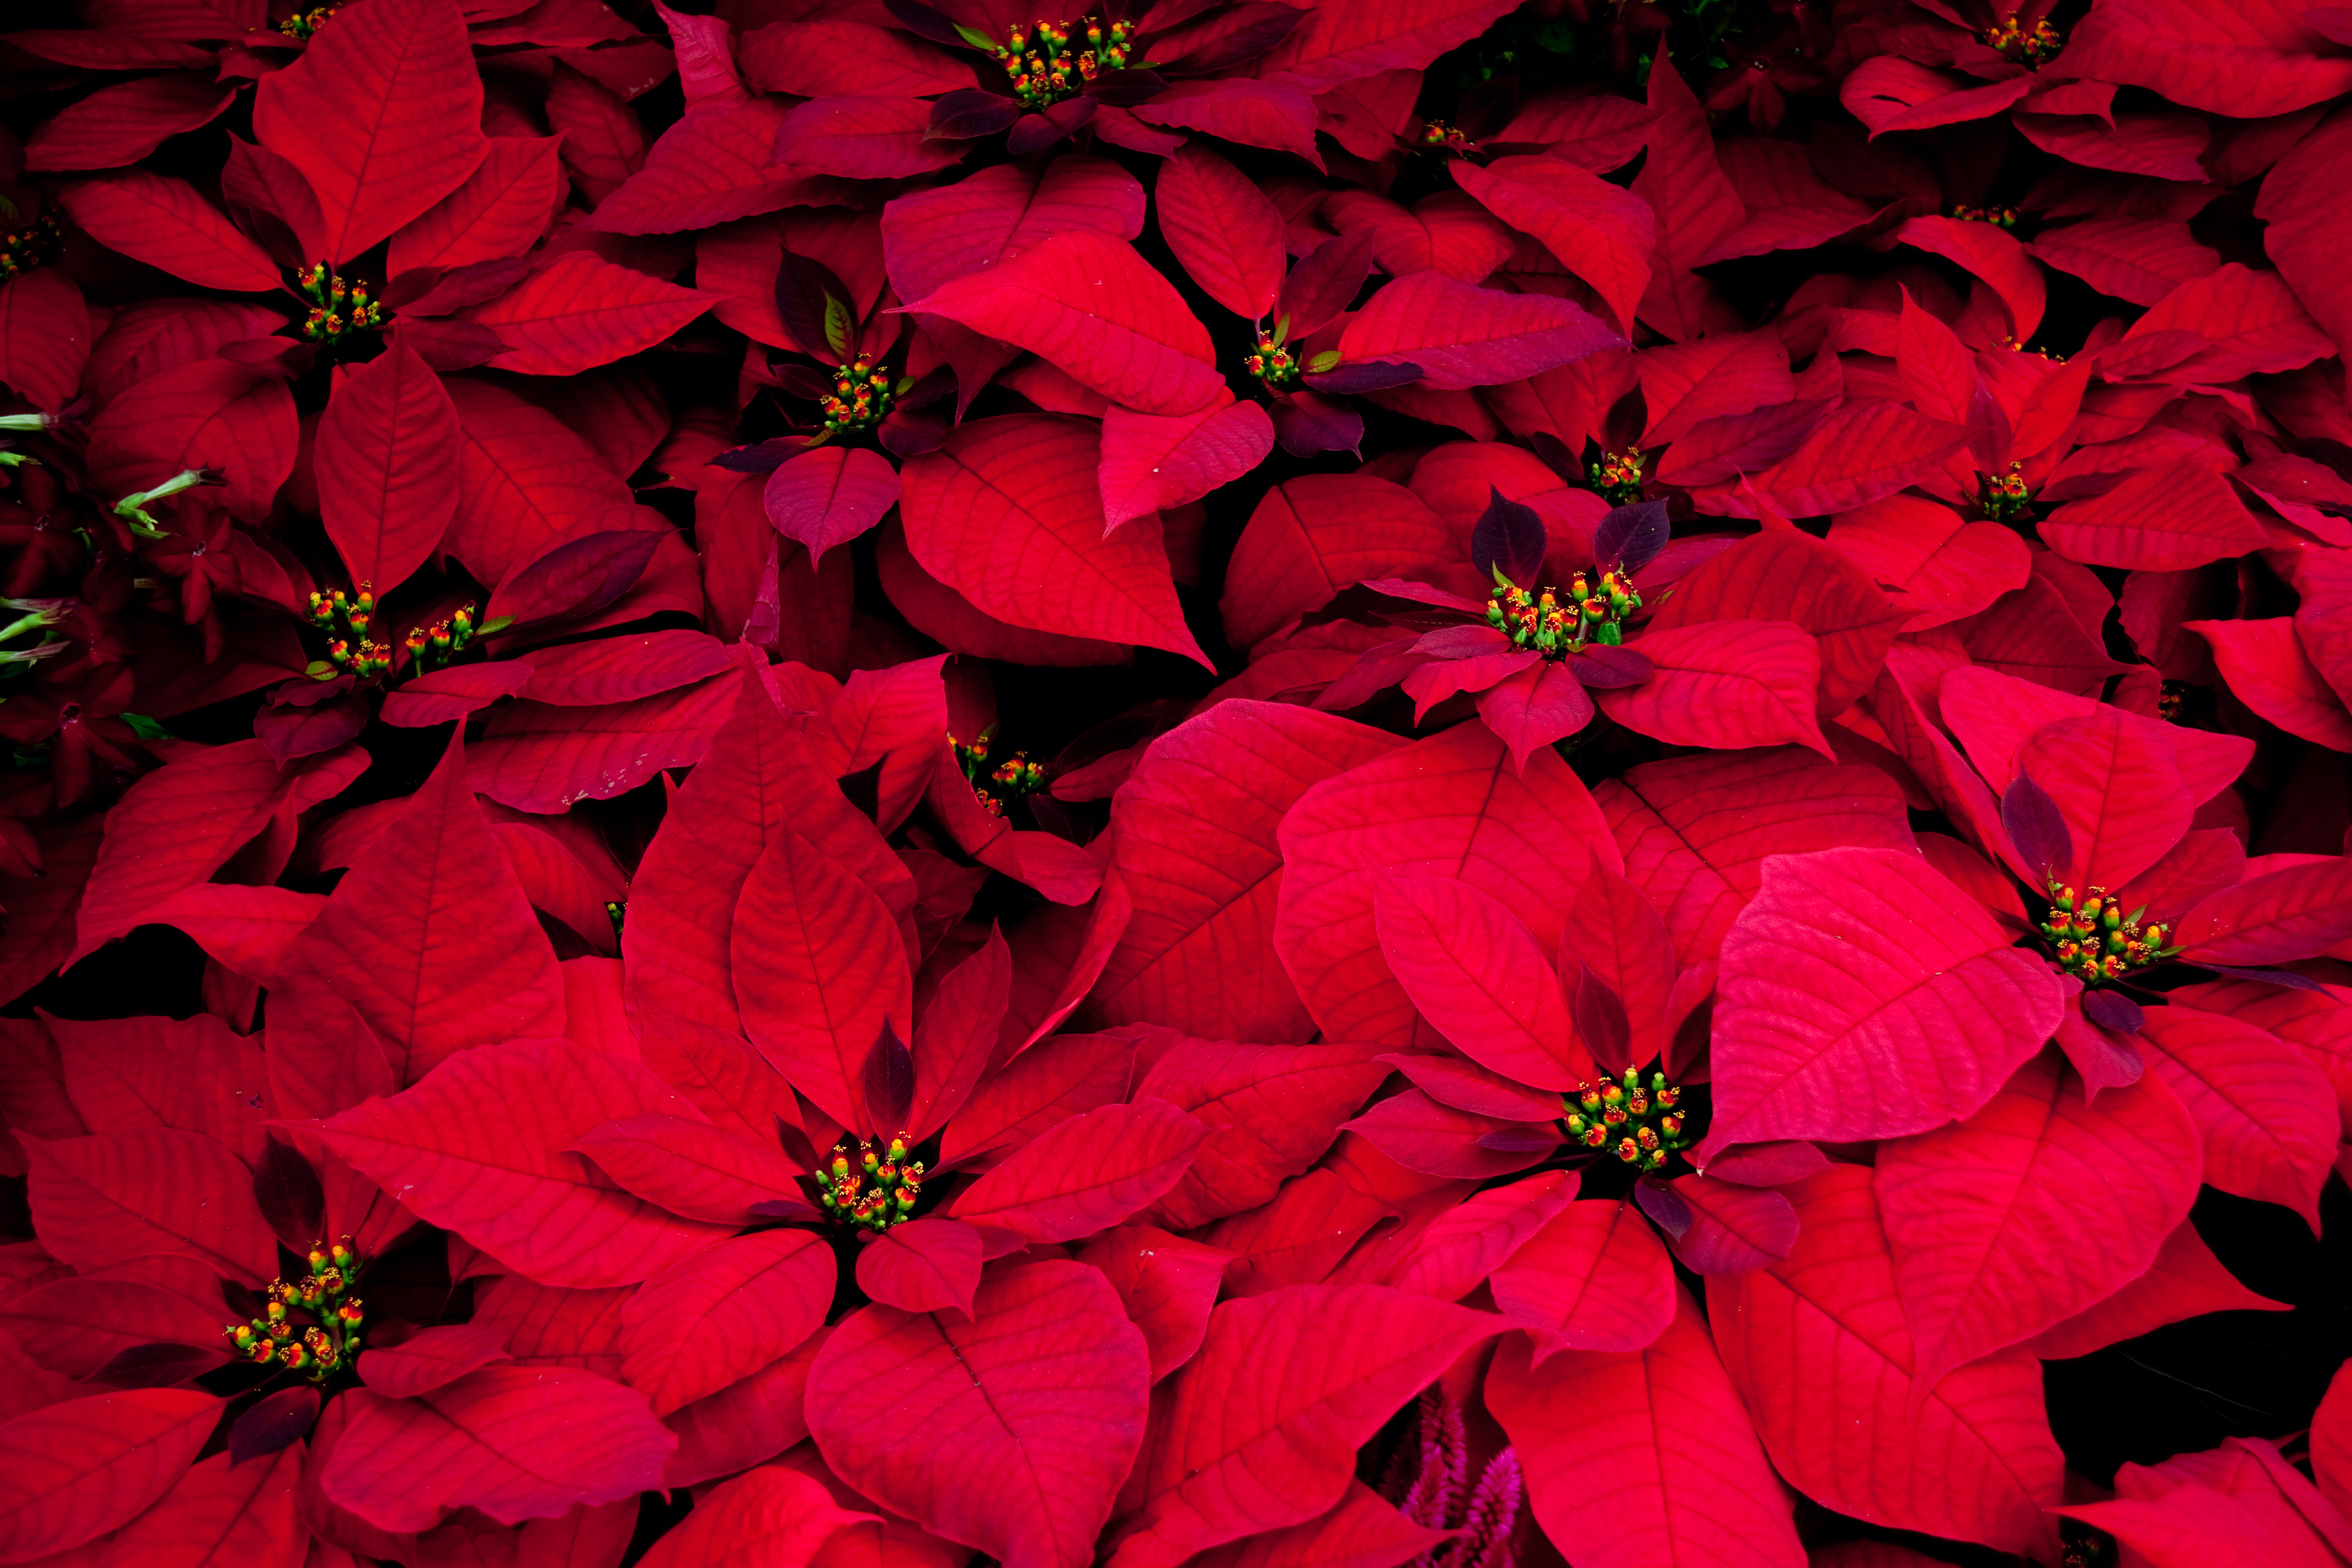 leaves, euphorbia is most beautiful, flowers, poinsettia, red, plant, milk is beautiful